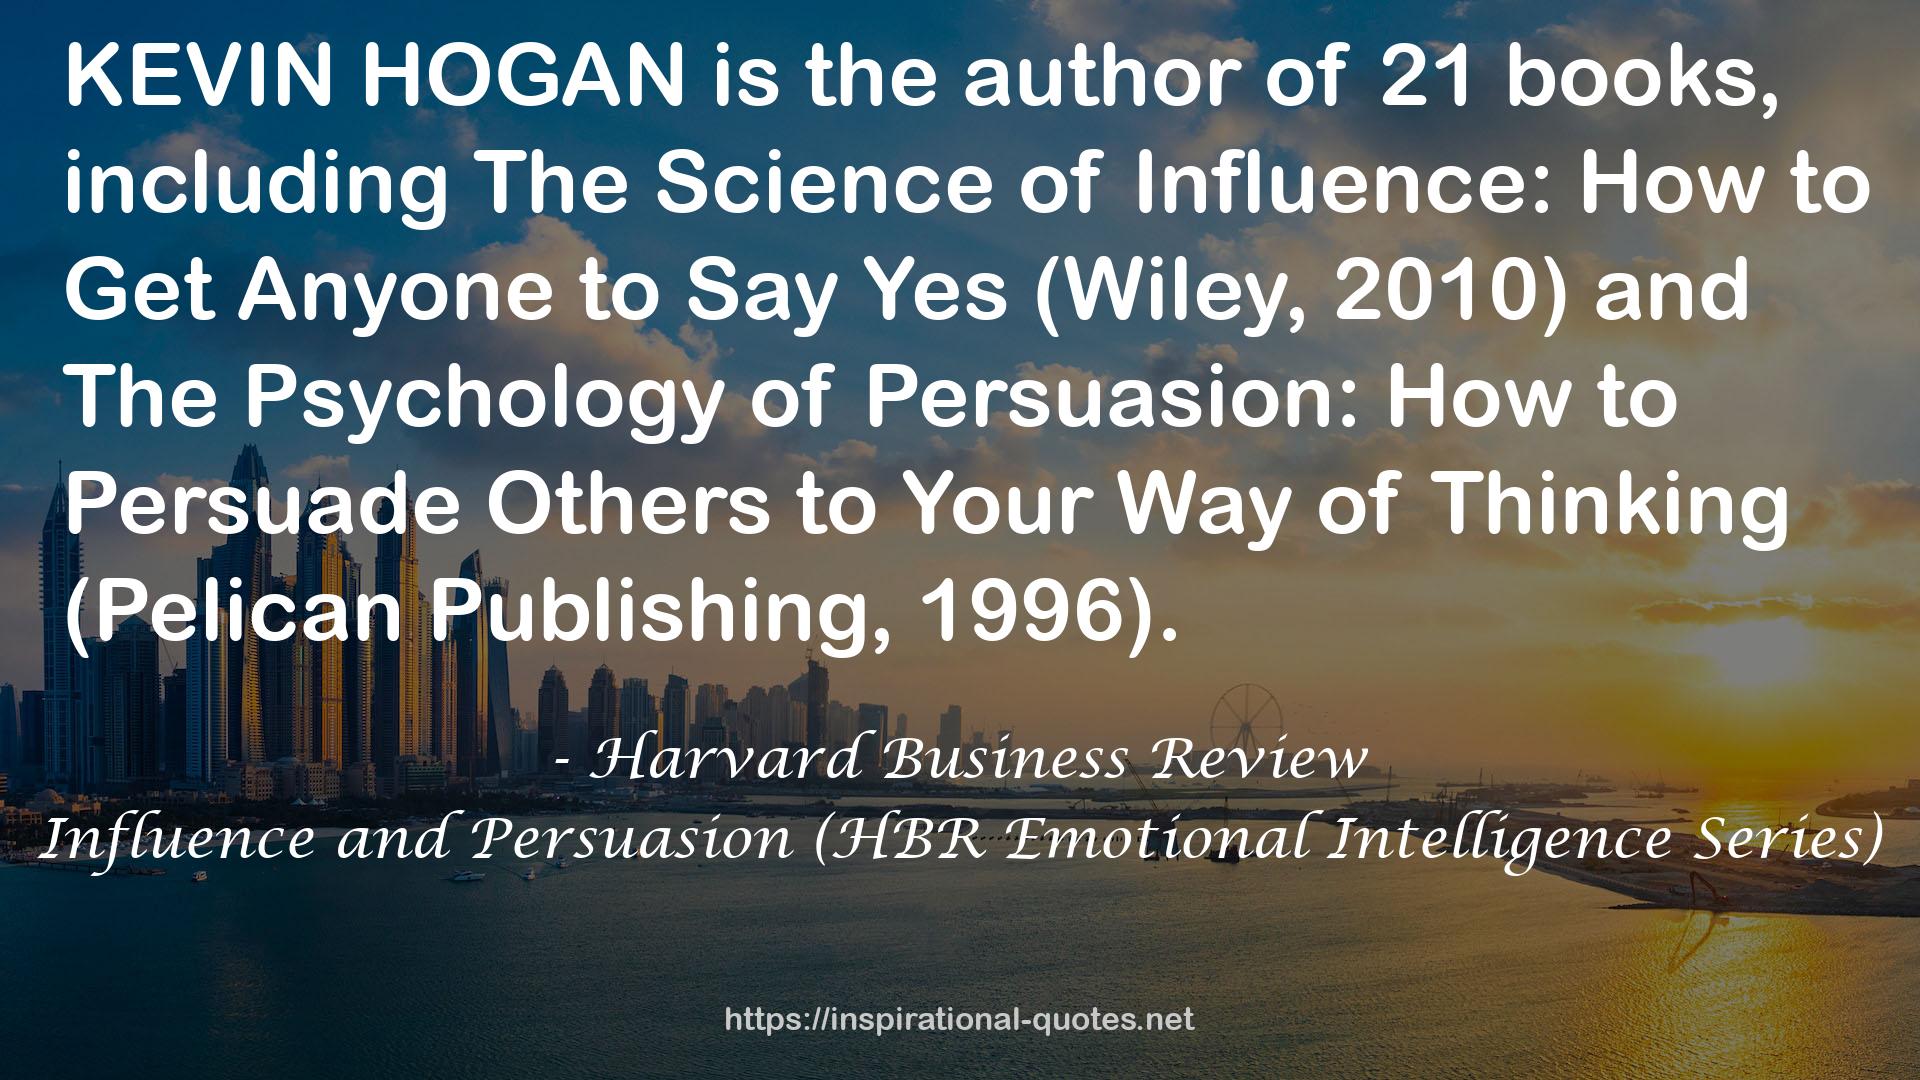 Influence and Persuasion (HBR Emotional Intelligence Series) QUOTES